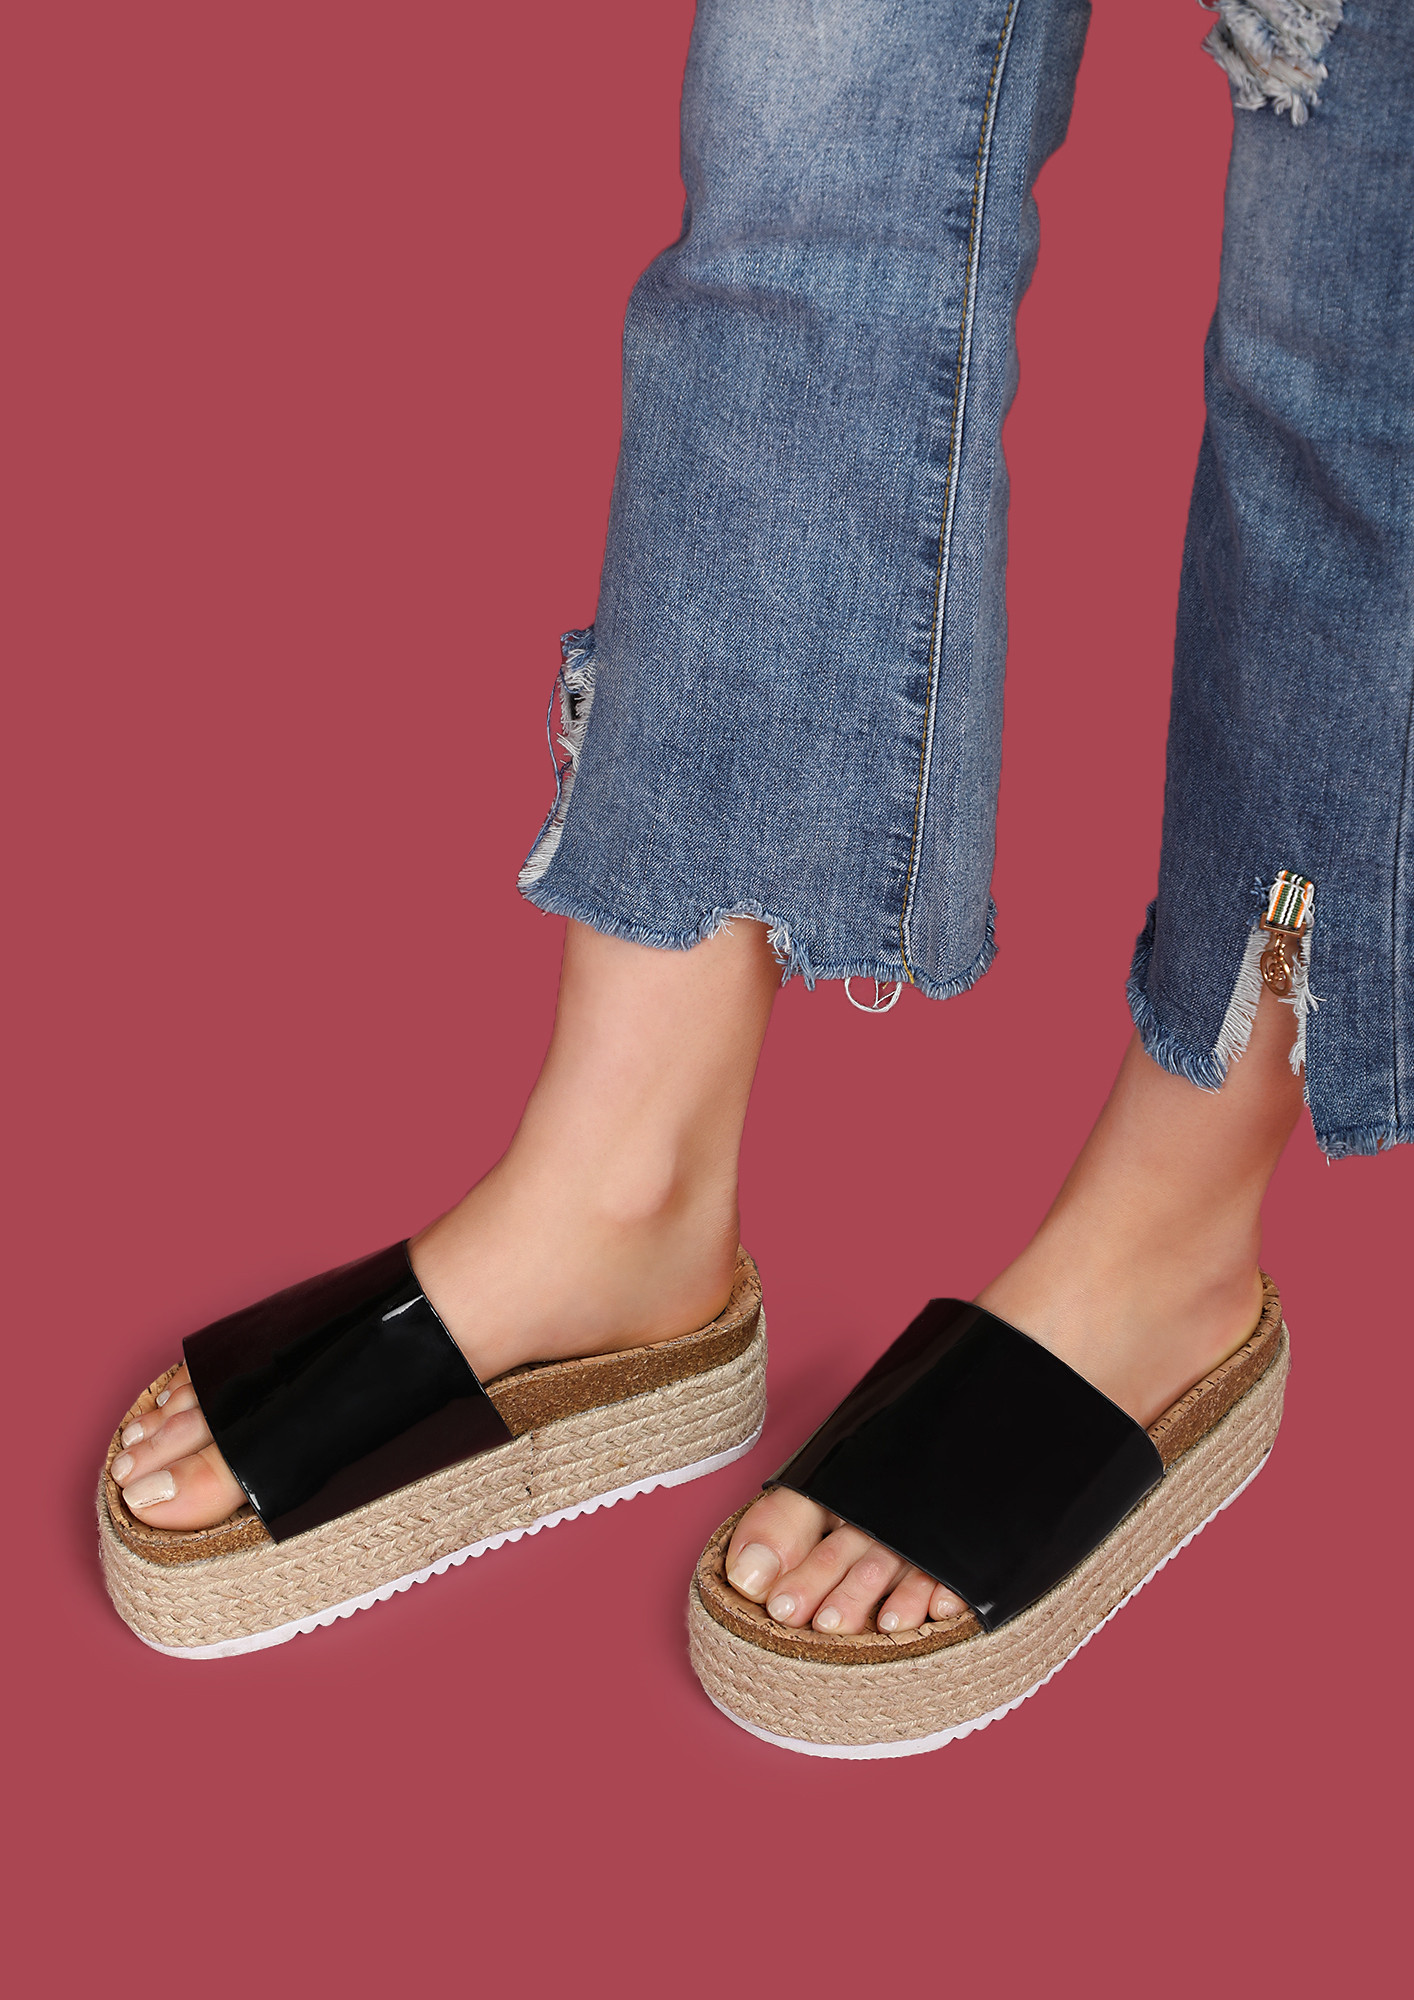 SLIP INTO AN EASE BLACK HEELED SANDALS